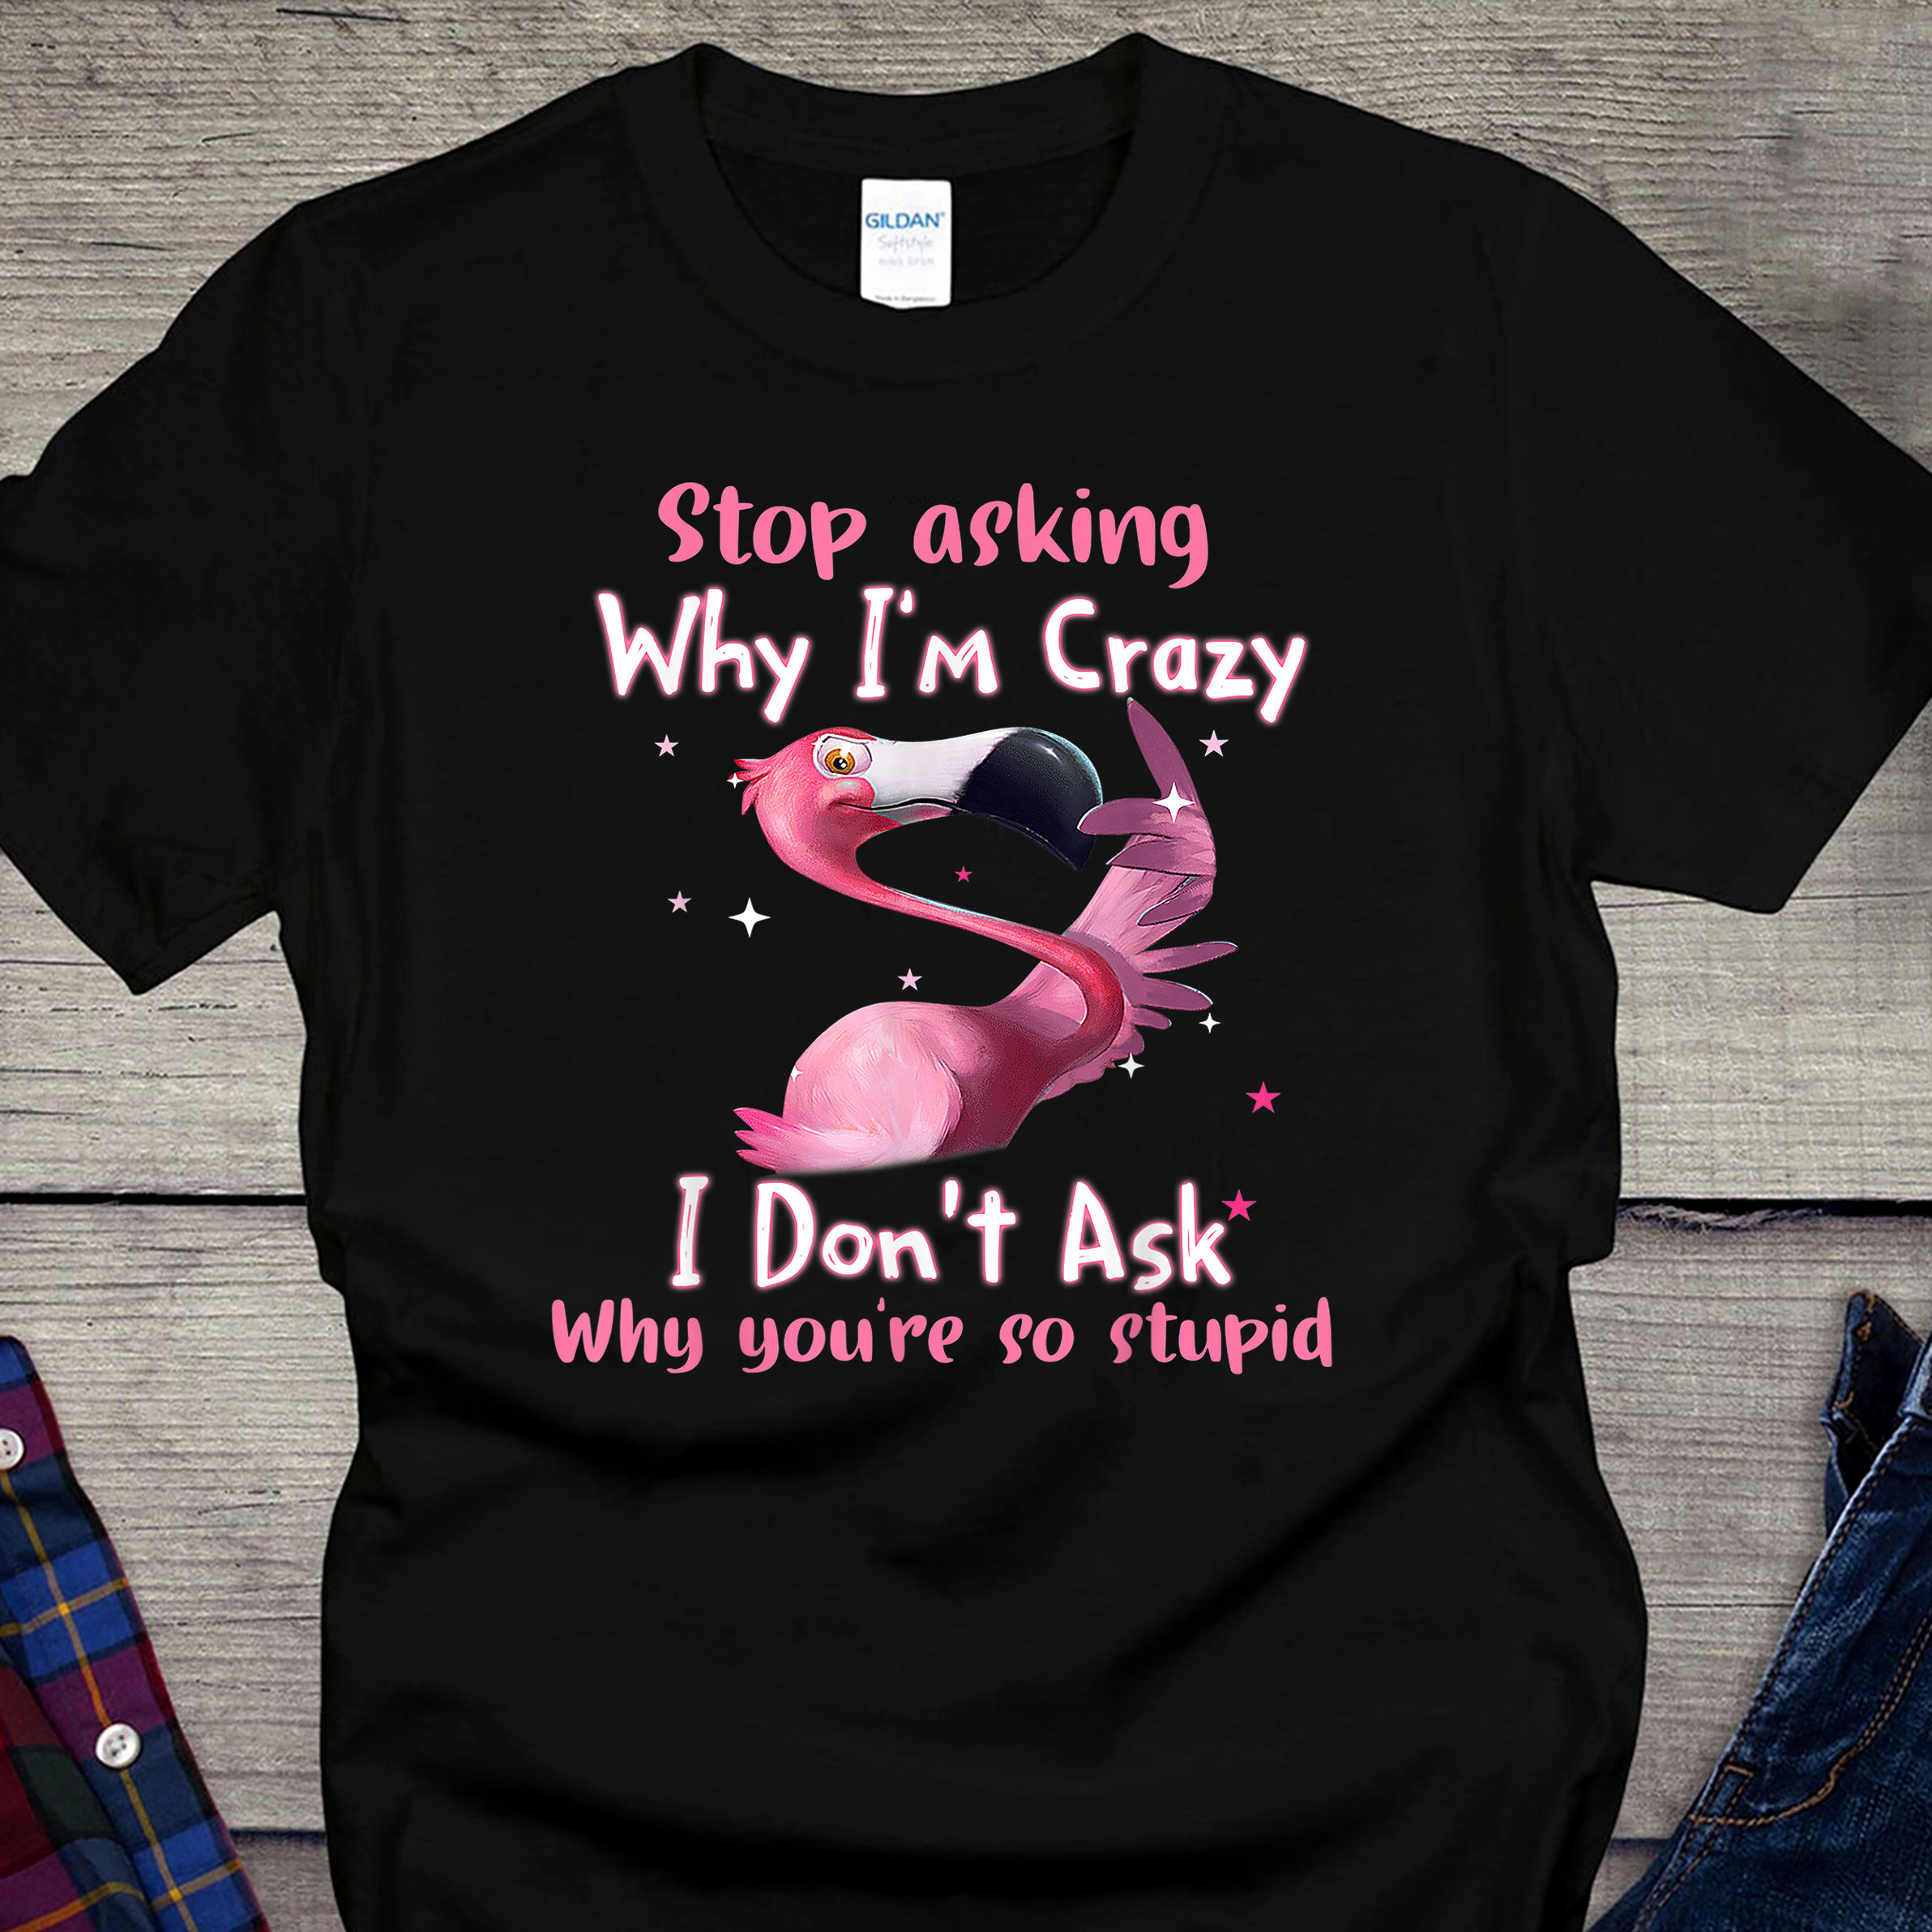 Flamingo Stop Asking Why I'm Crazy T-Shirt, I Don't Ask Why You're So Stupid Shirt, Funny Flamingo Shirt, Flamingo Lover Shirt, Flamingo Tee